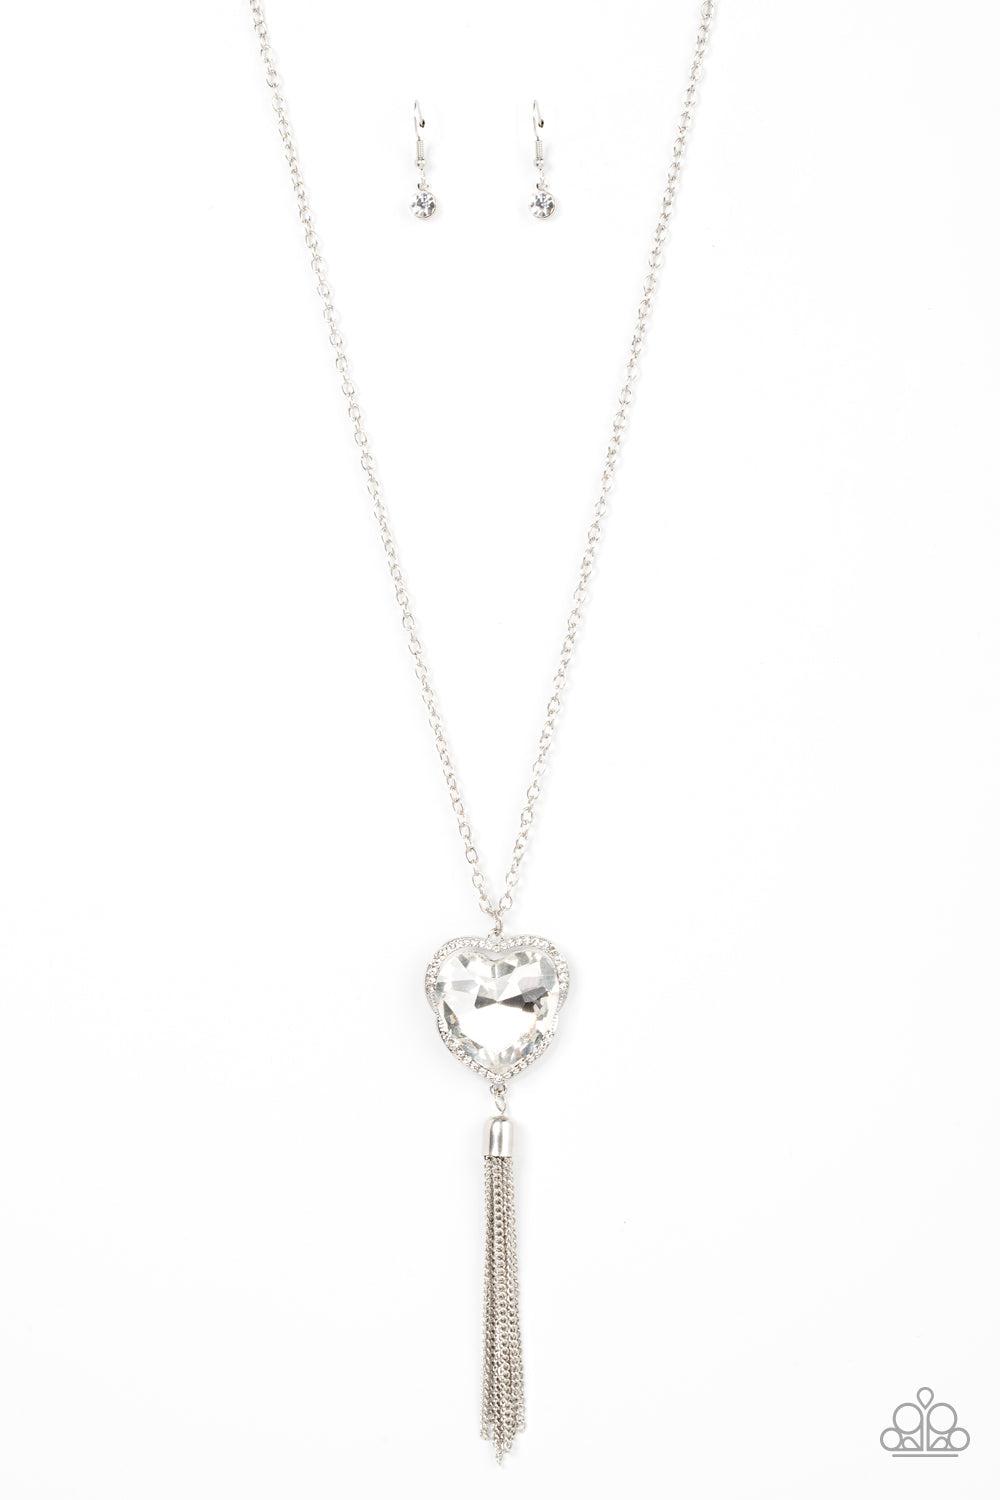 Finding My Forever White Rhinestone Heart Necklace - Paparazzi Accessories- lightbox - CarasShop.com - $5 Jewelry by Cara Jewels